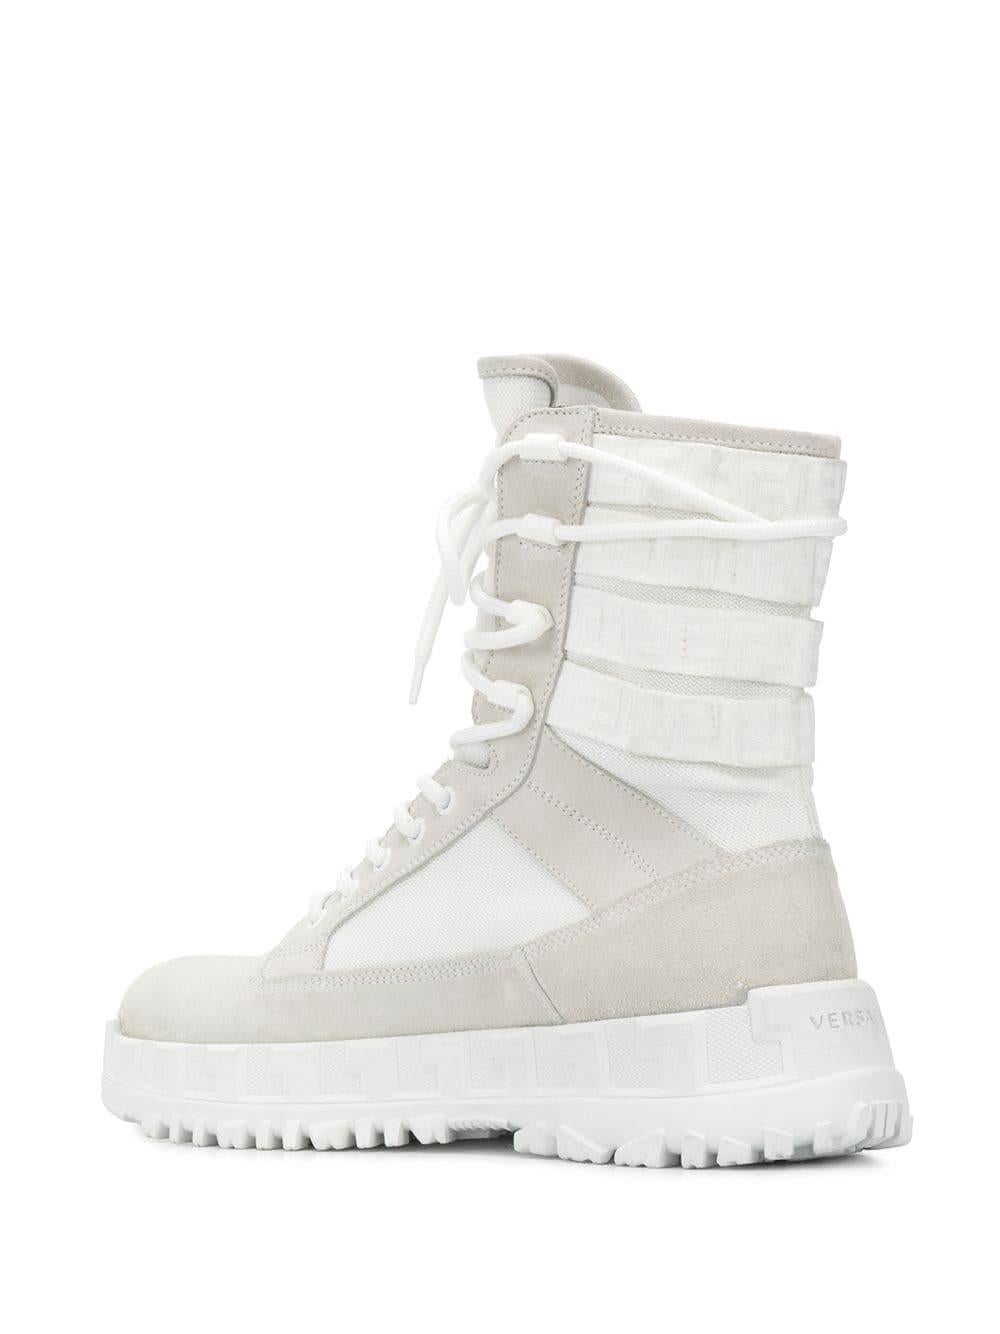 Versace Mens SS20 Runway White Mid-Calf Lace-Up Combat Boot / Sneakers

Debuting on the Spring-Summer 2020 runway, the Greca Rhegis combat boots are not your average shoes.  With a mid-calf length, they have a strappy detail on the back,